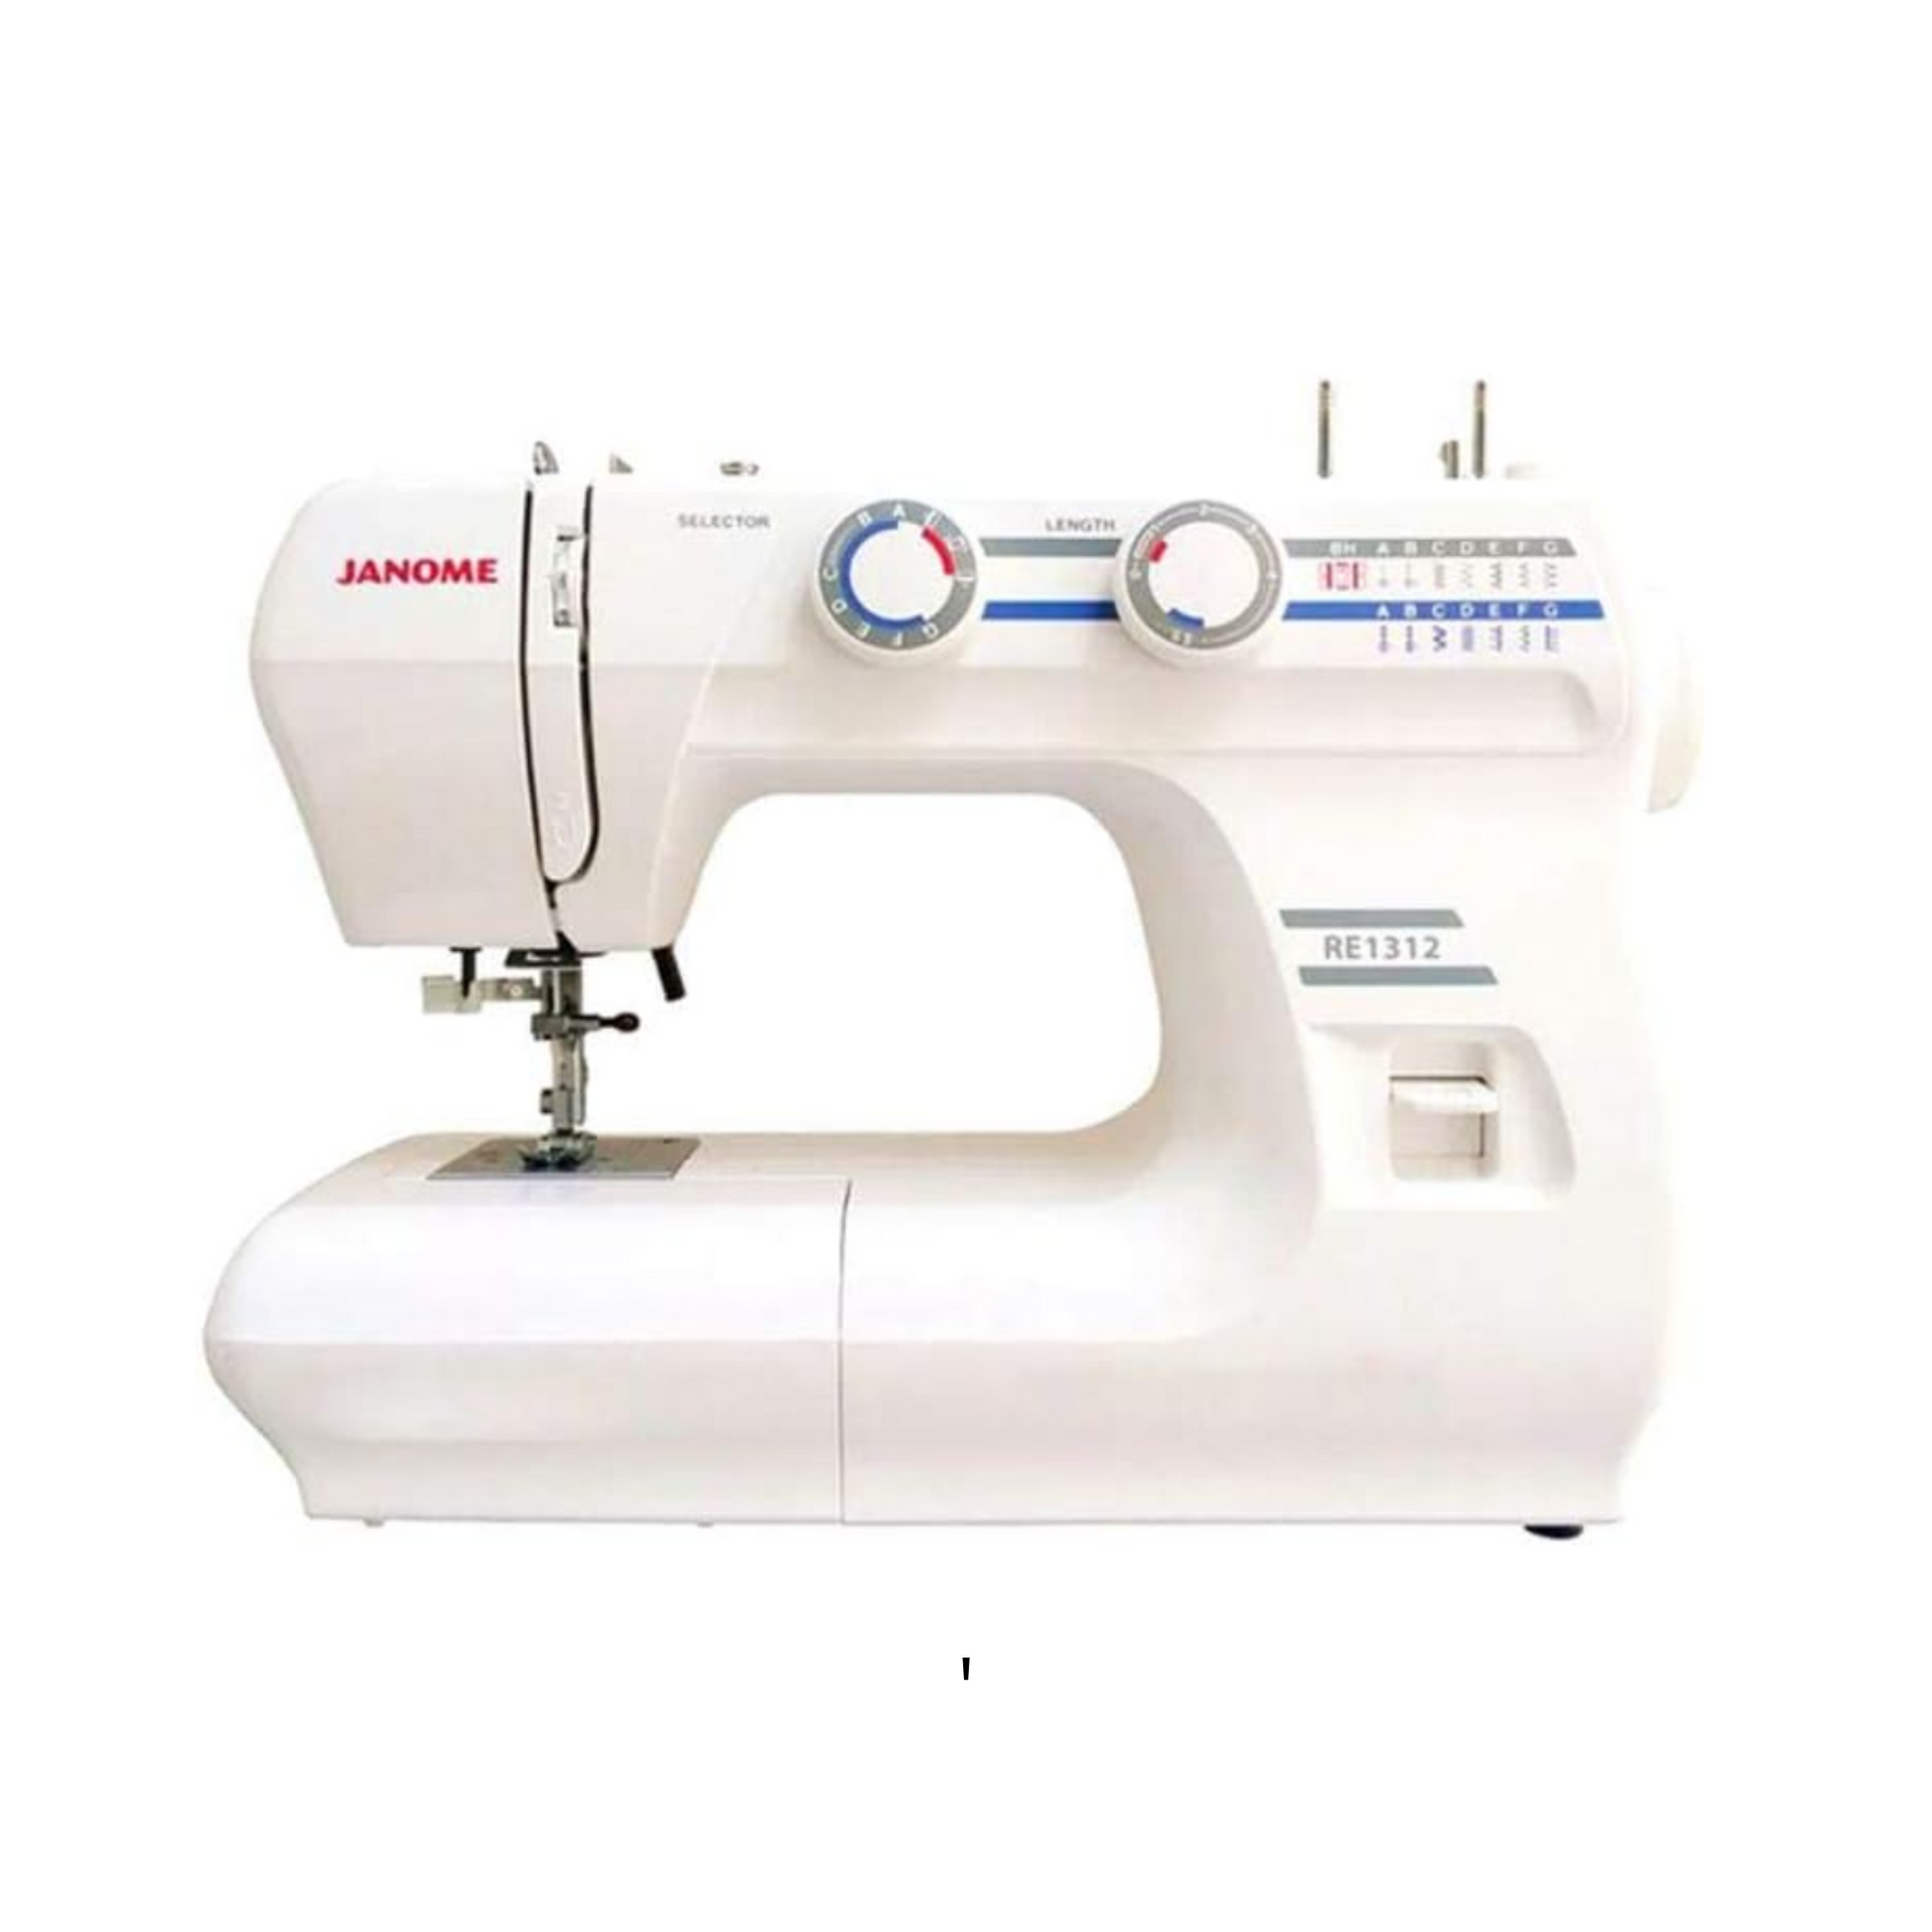 Janome  RE1312 - Sewing machine - White - Front view